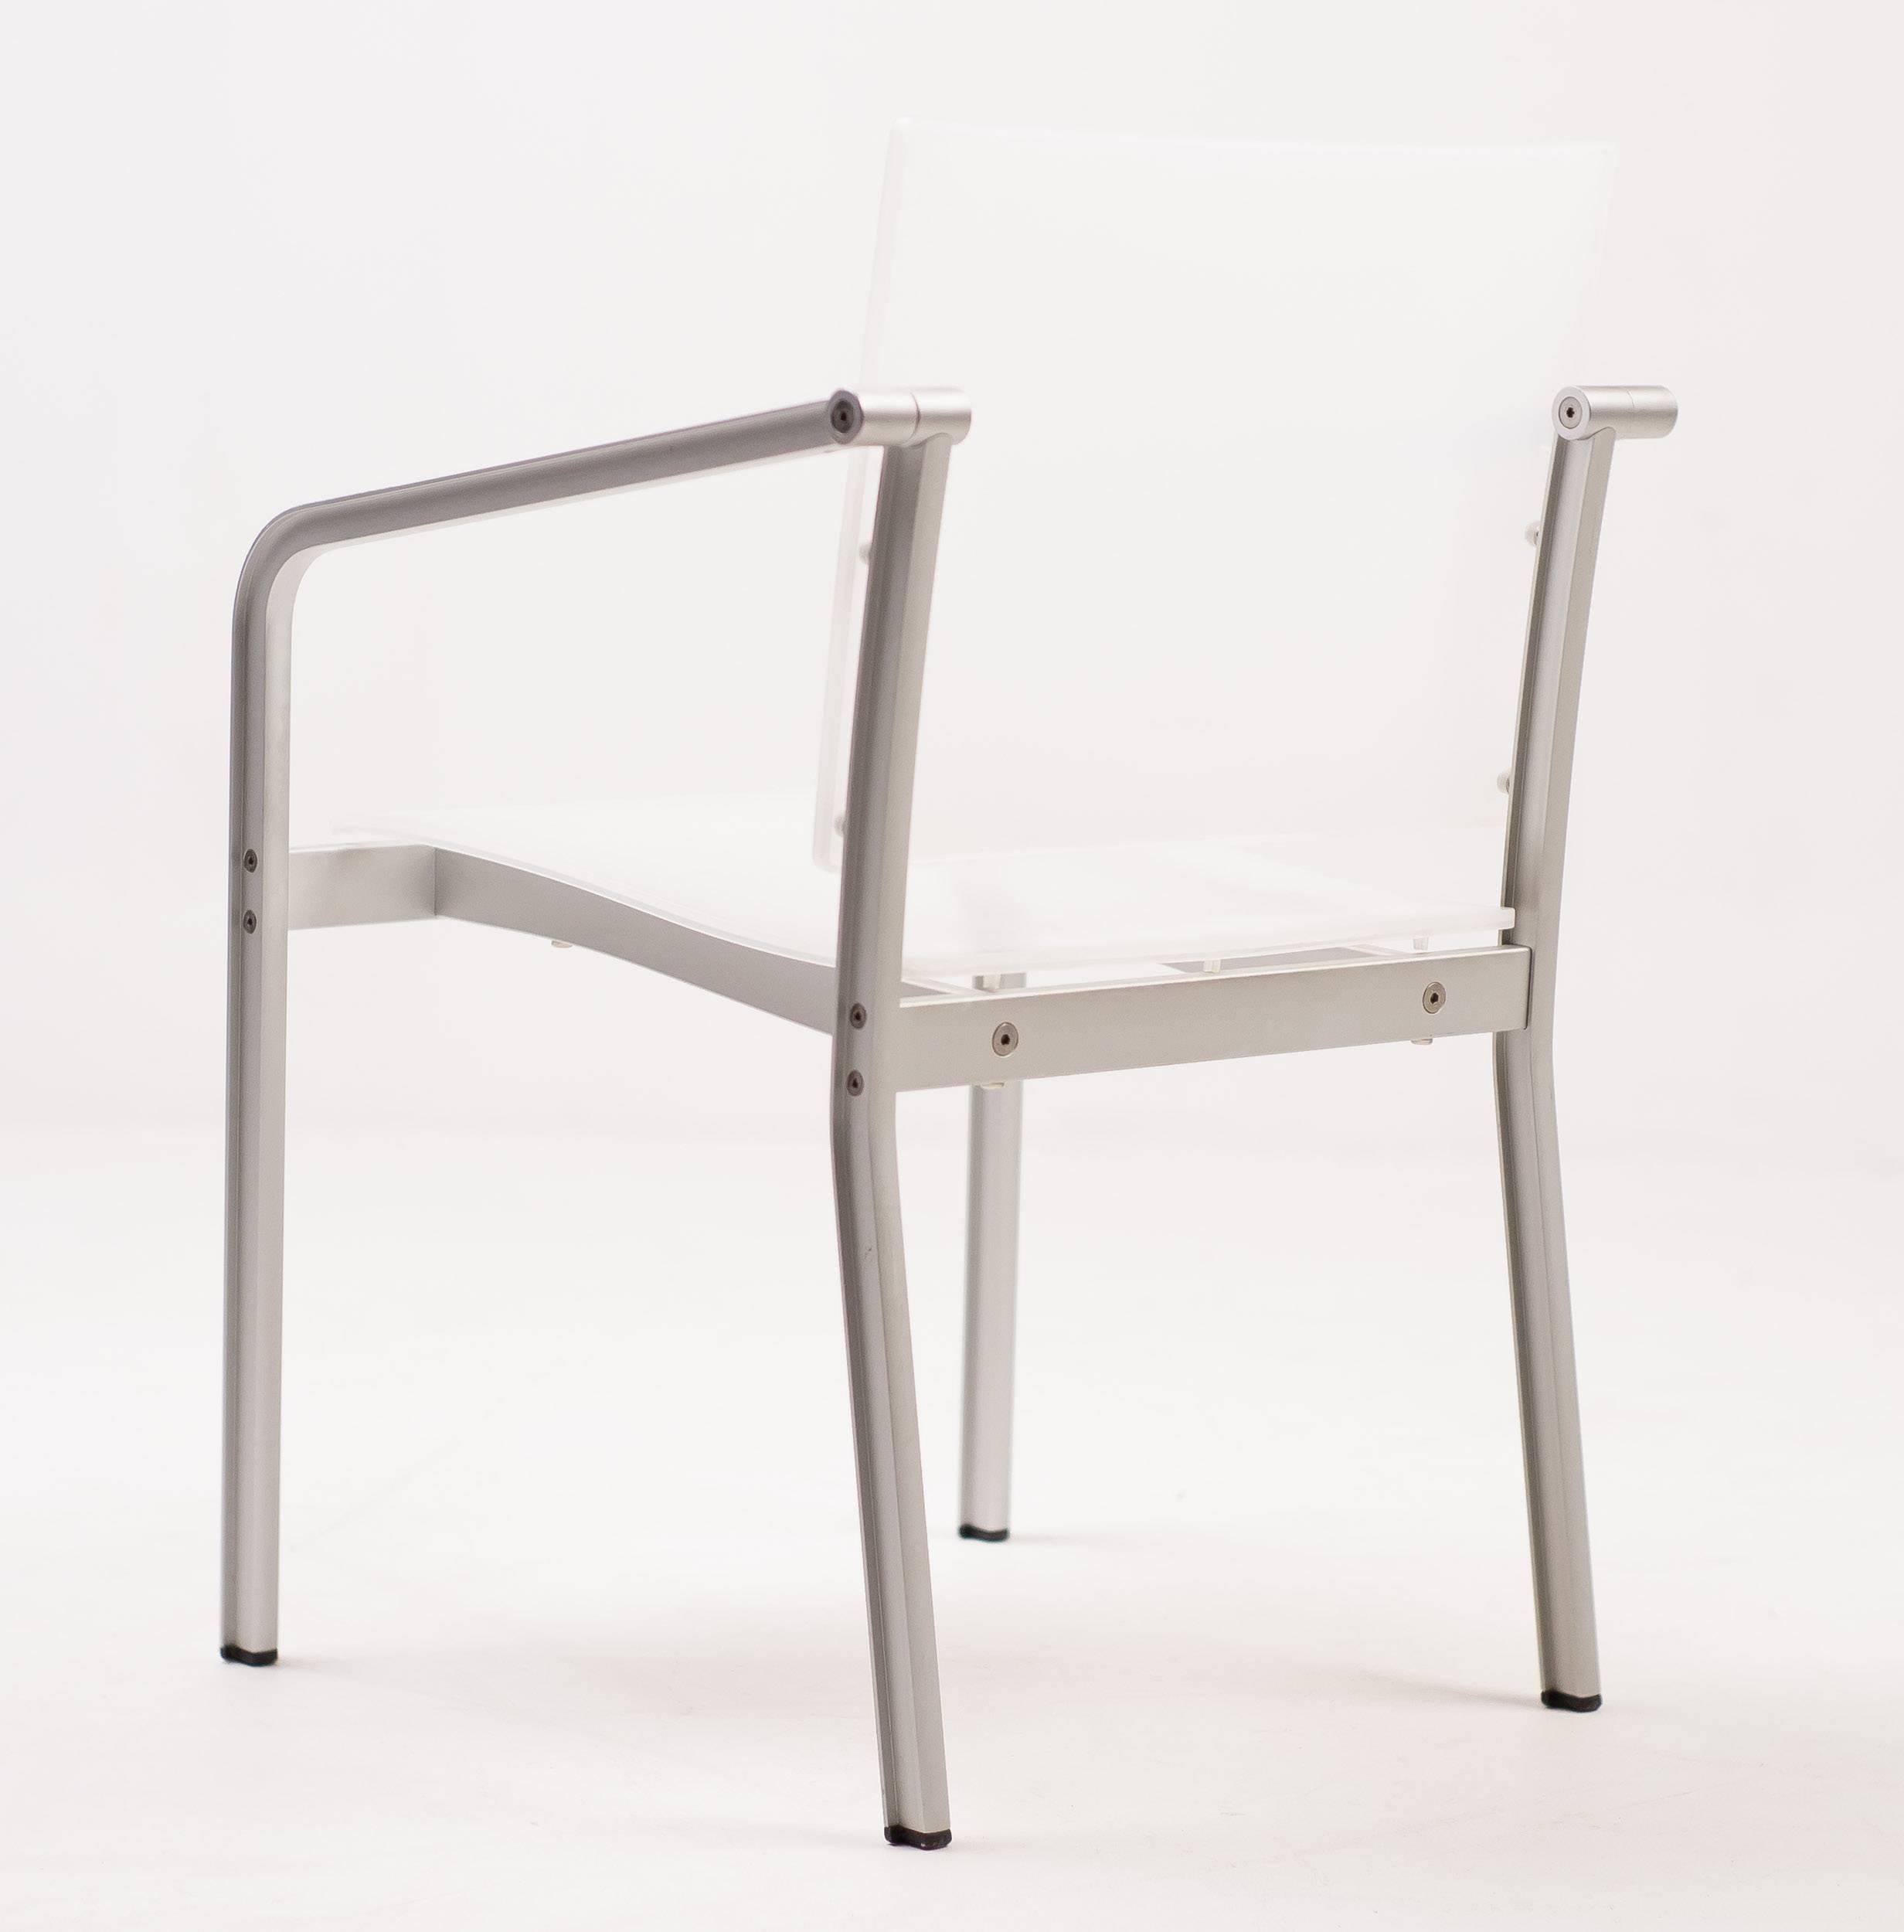 Anodized Pair of Chairs by Sir Norman Foster